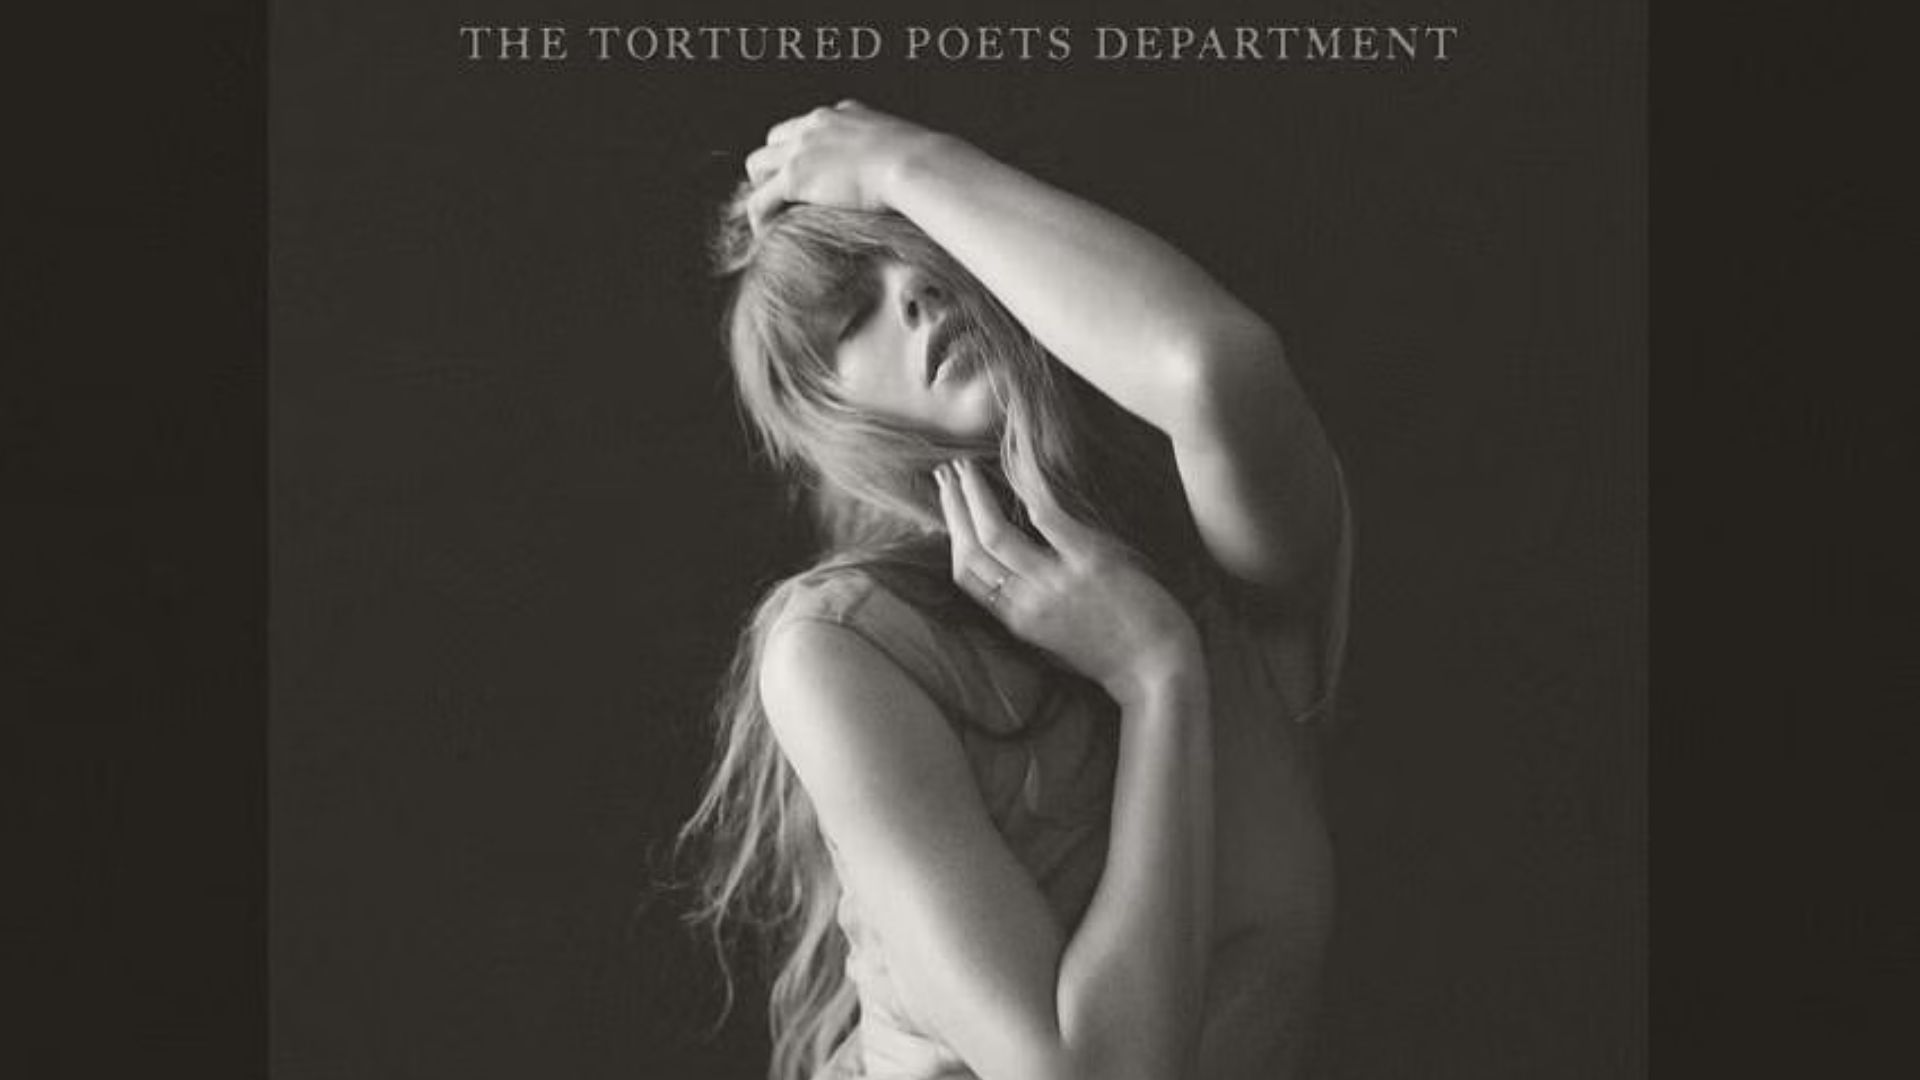 The Tortured Poets Department’, Taylor swift The Tortured Poets Department’, Taylor Swift album The Tortured Poets Department, Taylor Swift Album, Taylor Swift New Album, Taylor Swift, TSTTPD